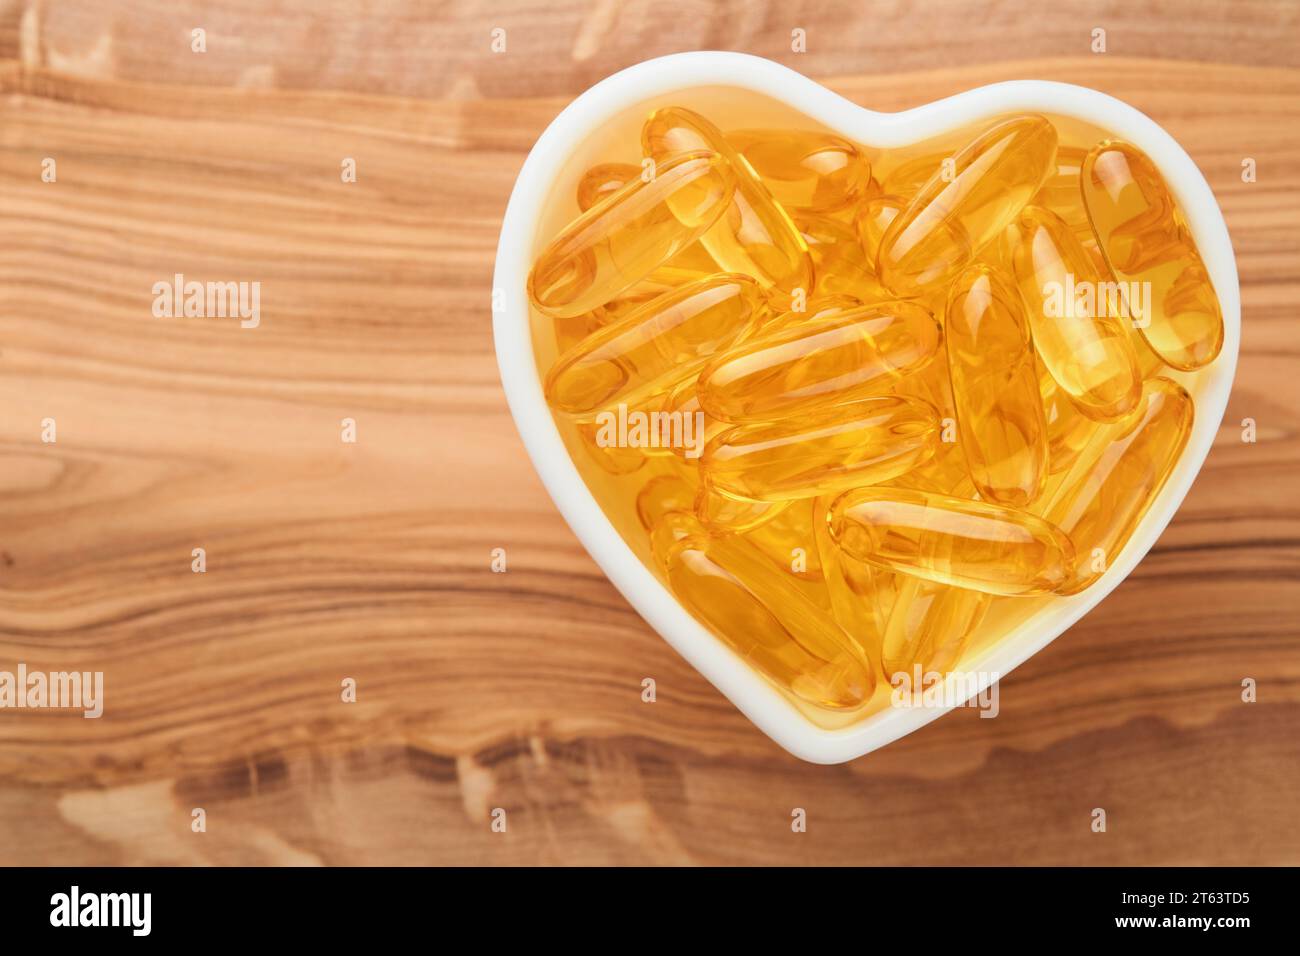 Capsules with Vitamin D, E or Omega 3,6,9 fatty acids in heart shape bowl on old wooden backgrounds. Food supplement oil filled fish oil. Natural supp Stock Photo